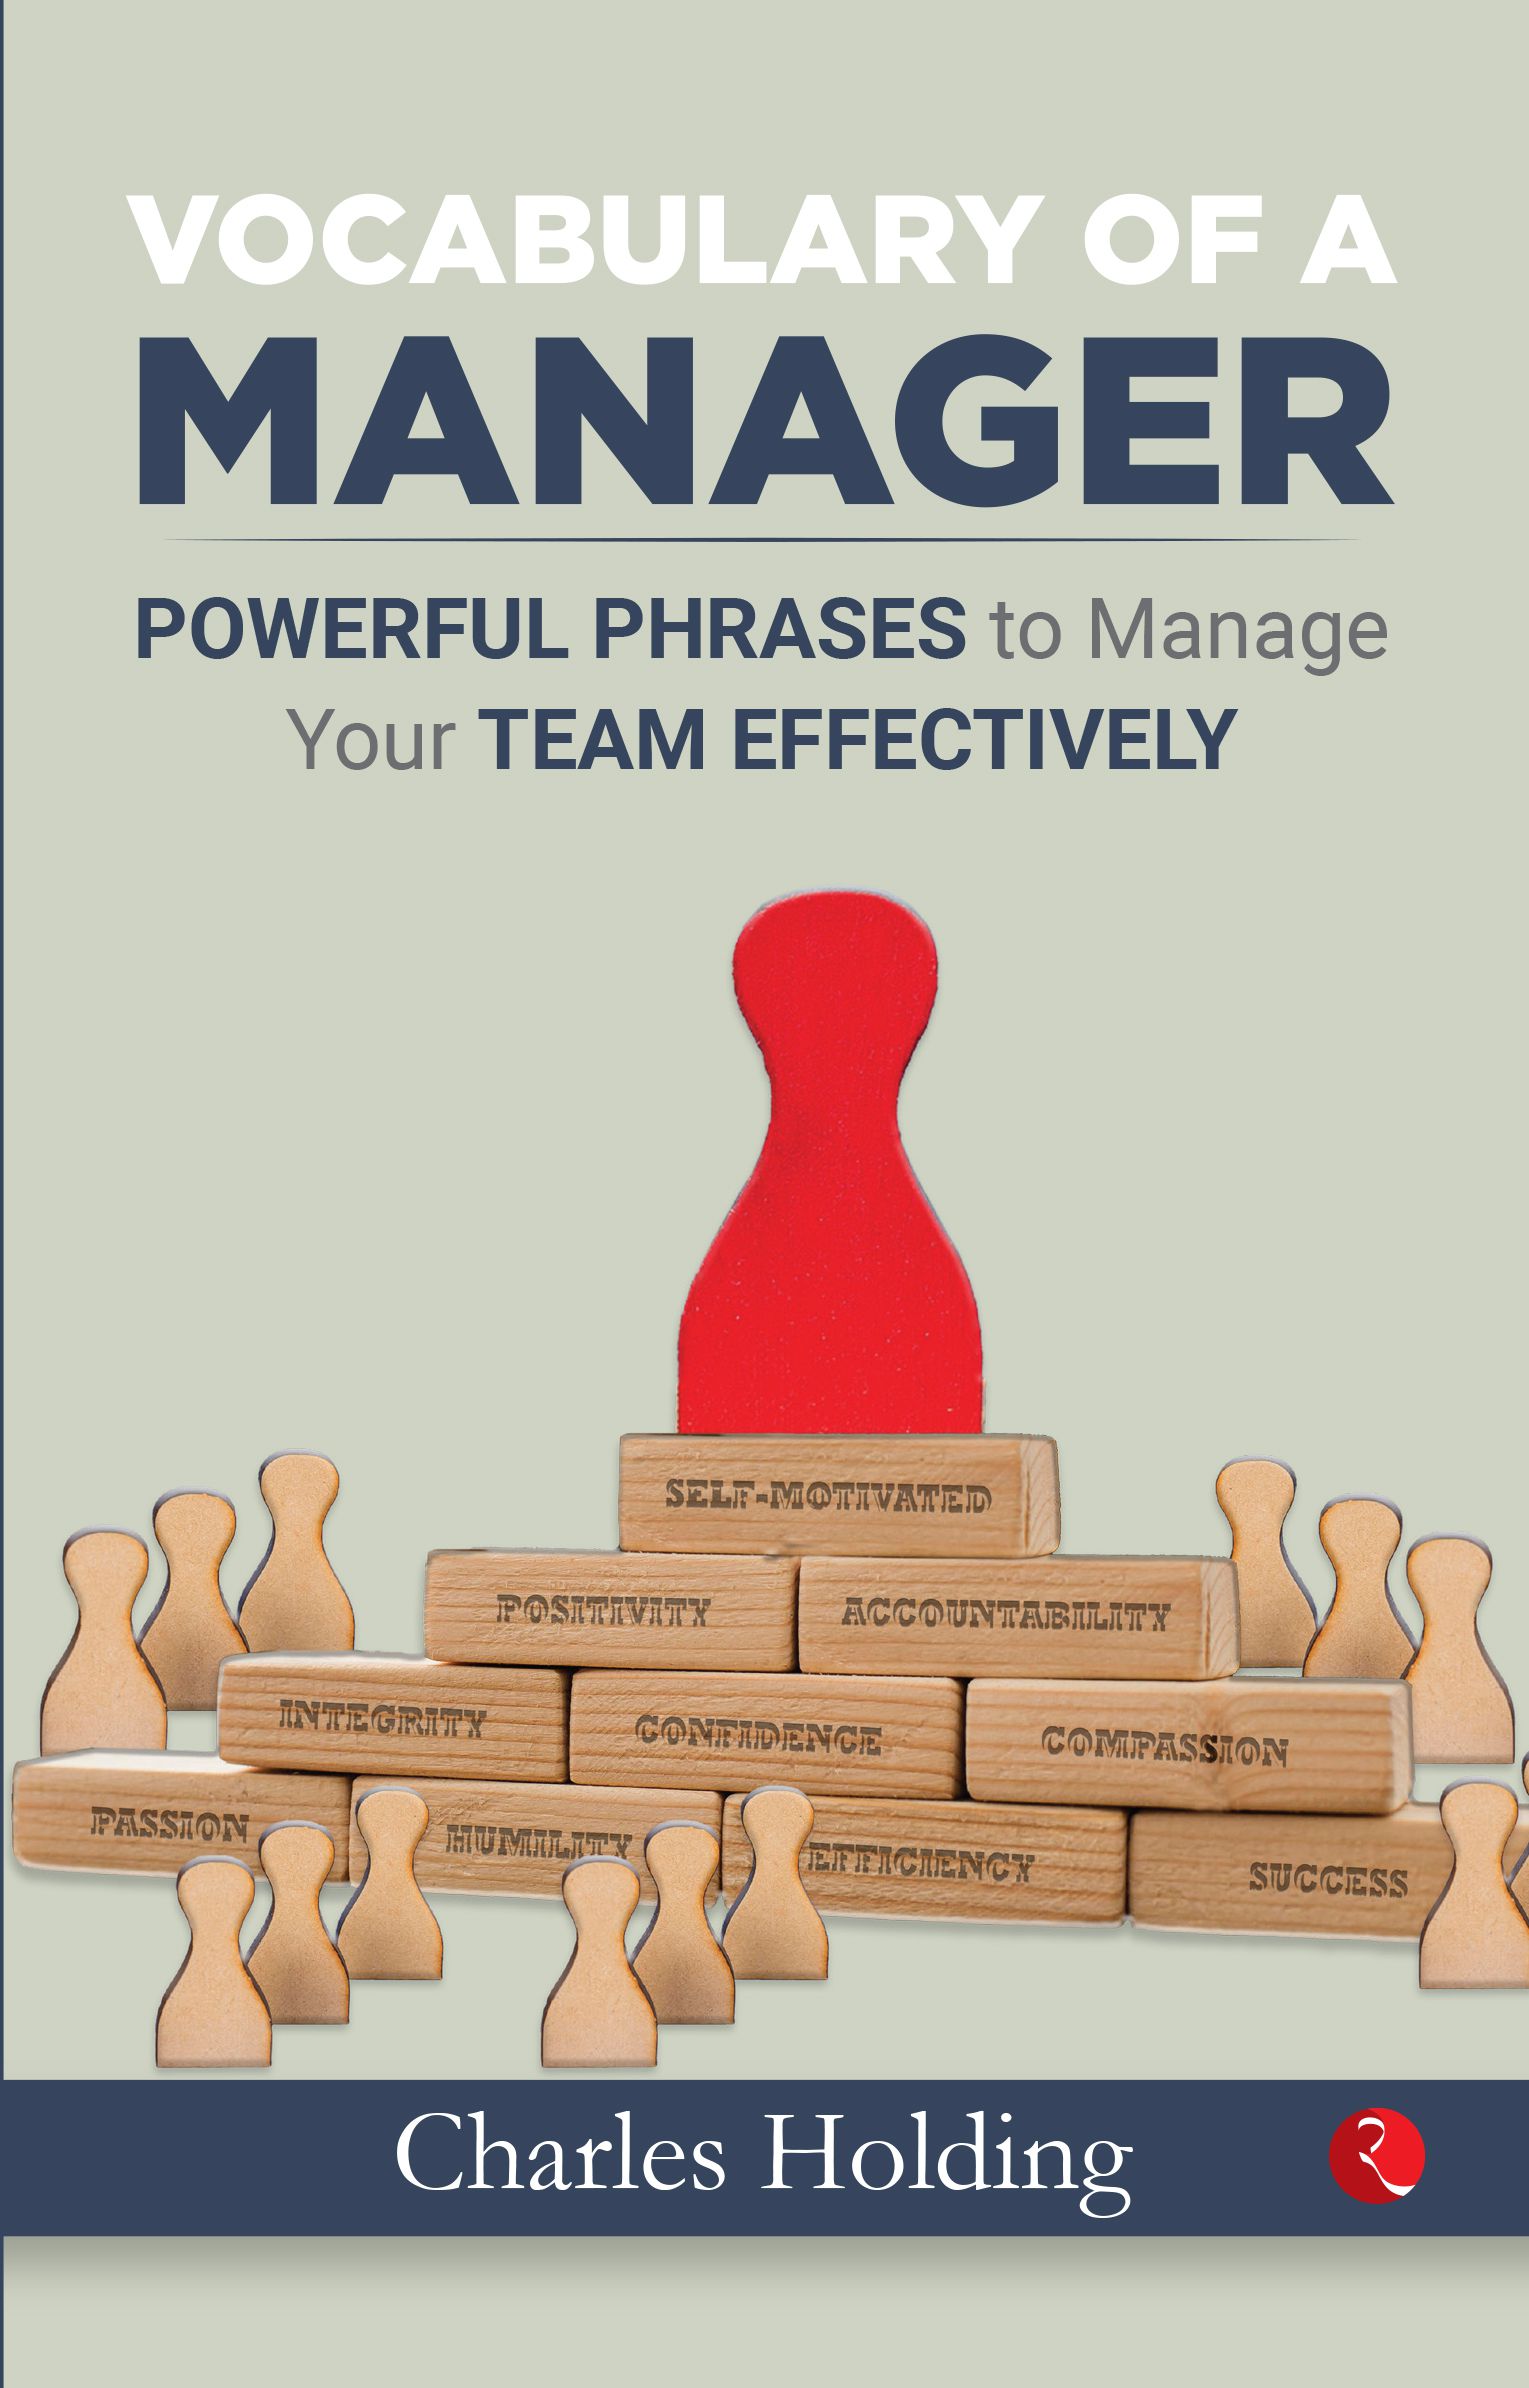     			Vocabulary of A Manager: Powerful Phrases to Manage Your Team Effectively by Charles Holding